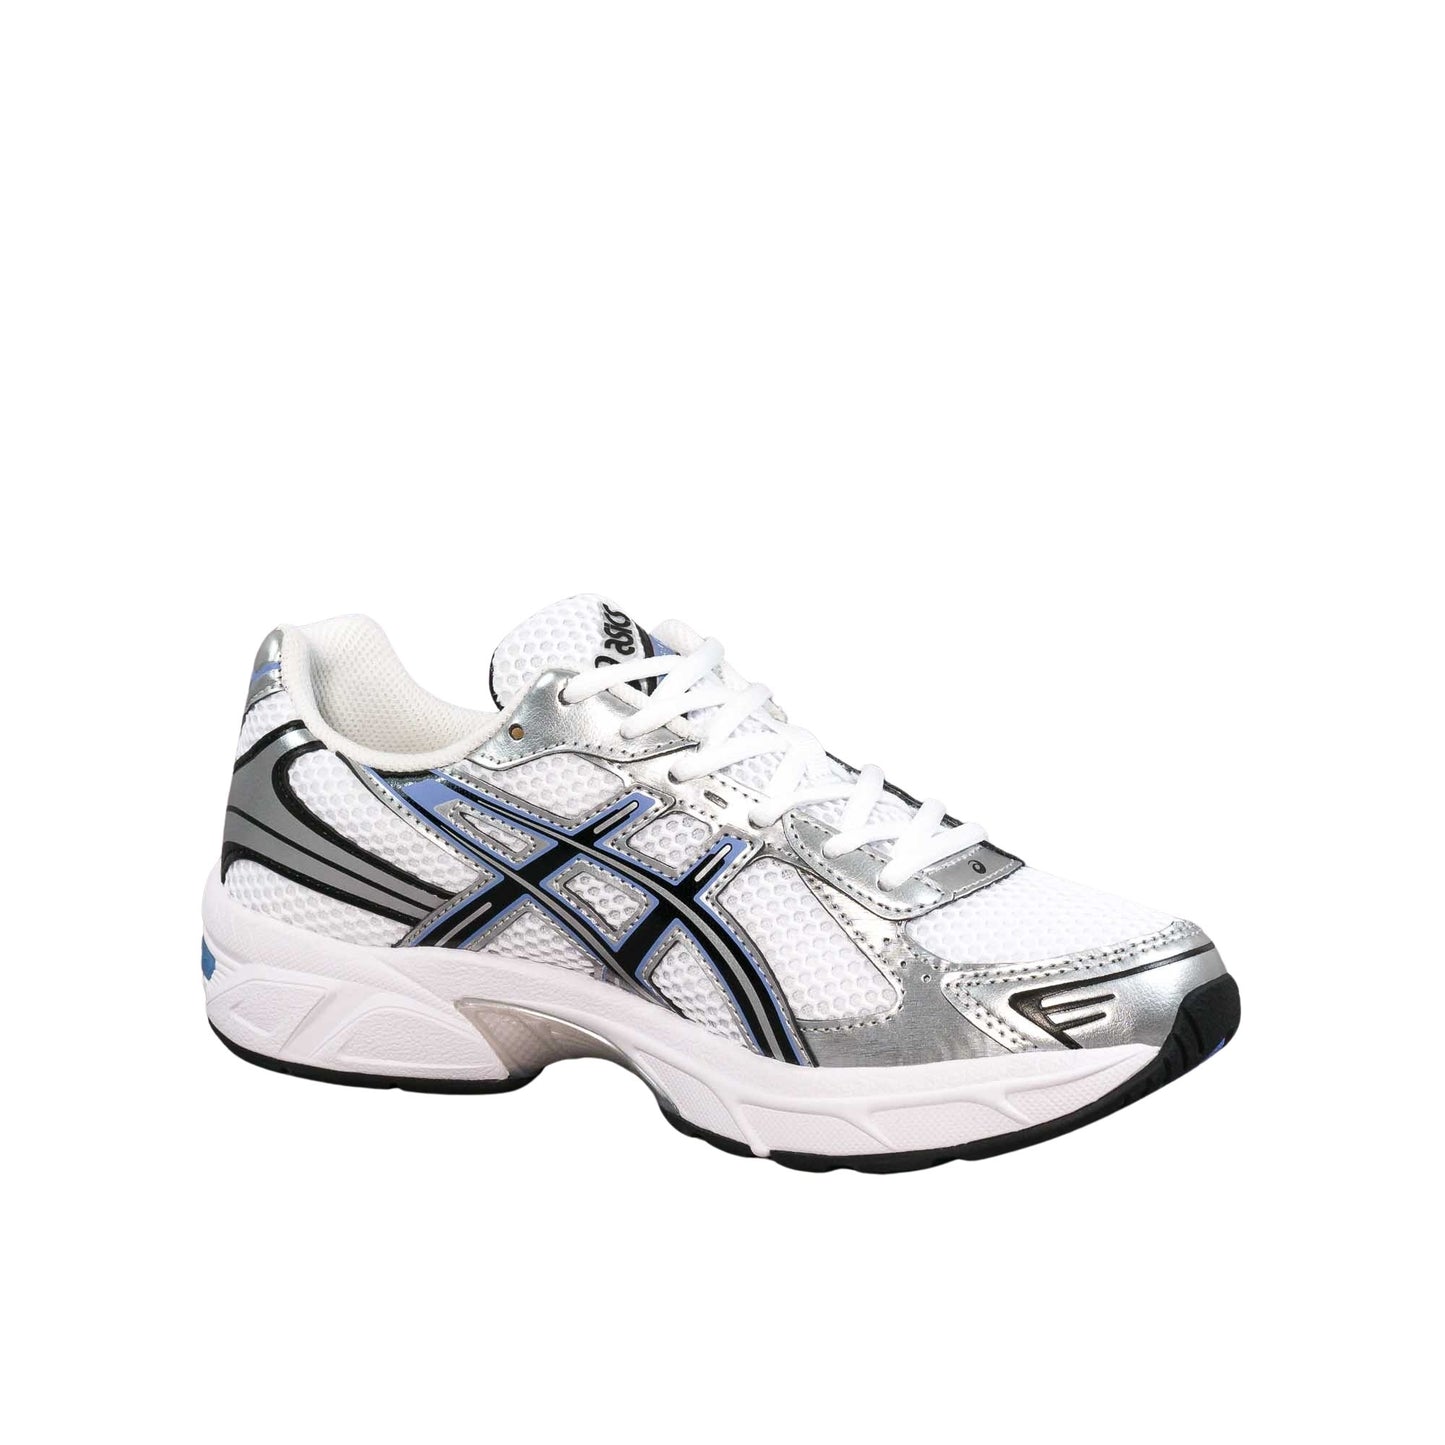 Asics-Sportstyle-Gel-1130-white-periwinkle-blue-1202A164-105